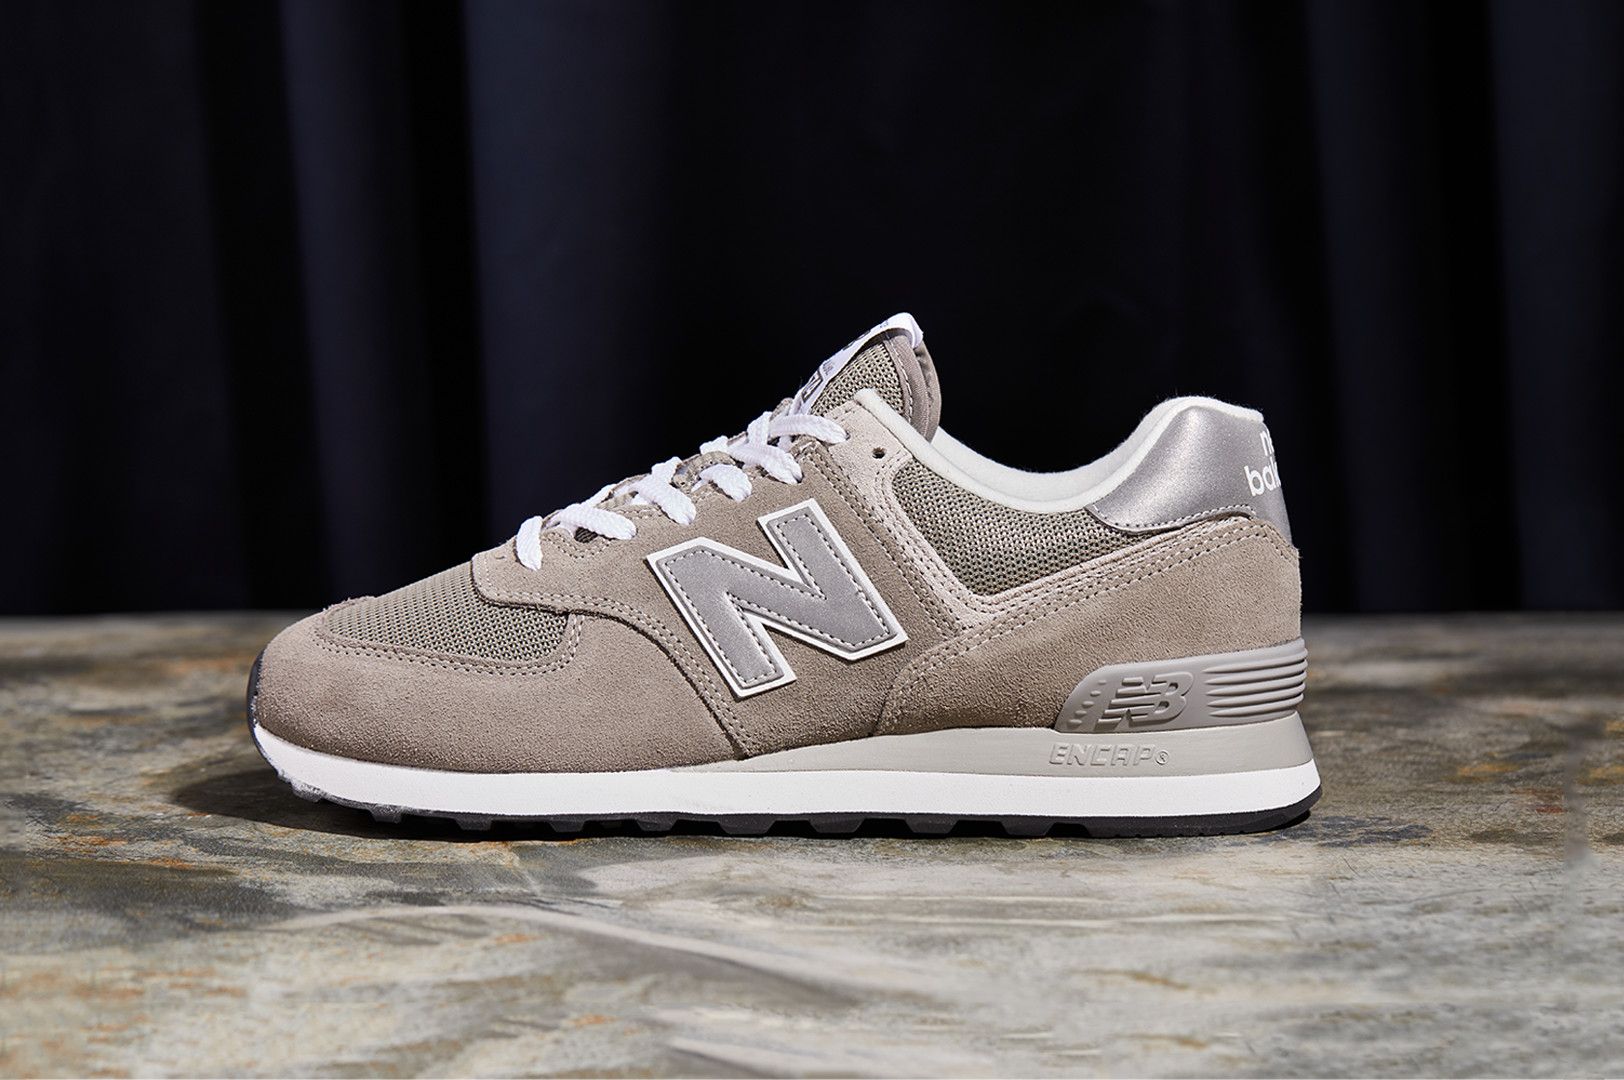 New Balance 574 Sneakers - The Sneaker 